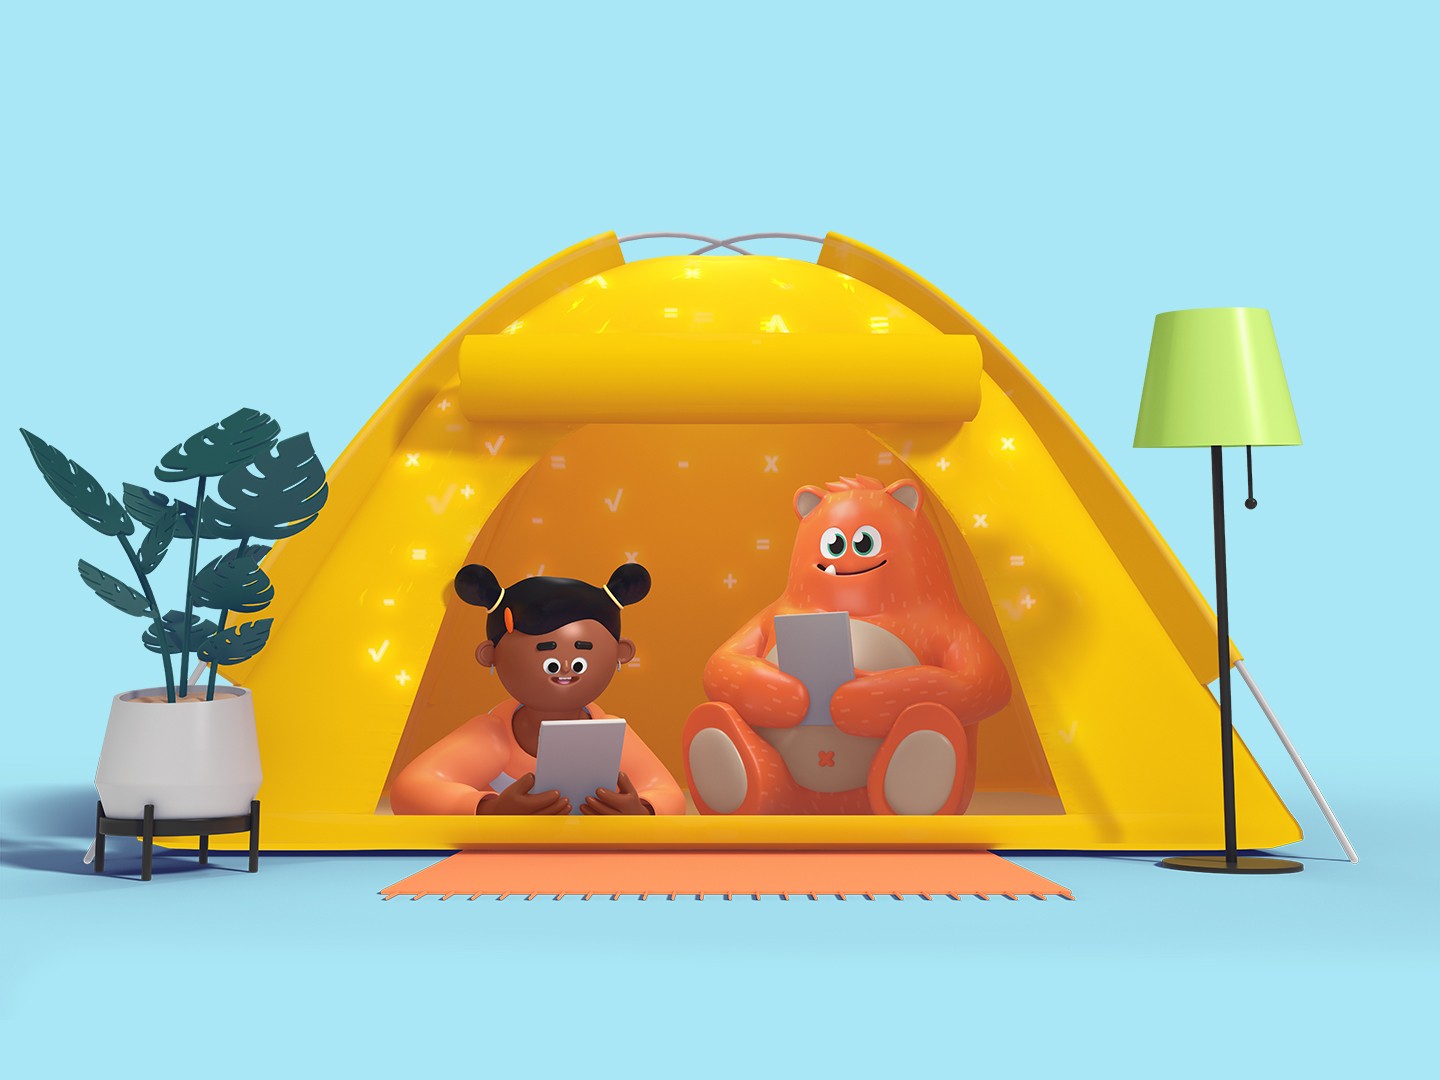 Illustration of Prodigy's mascot, Ed and a child sitting in a tent together and holding tablet devices.